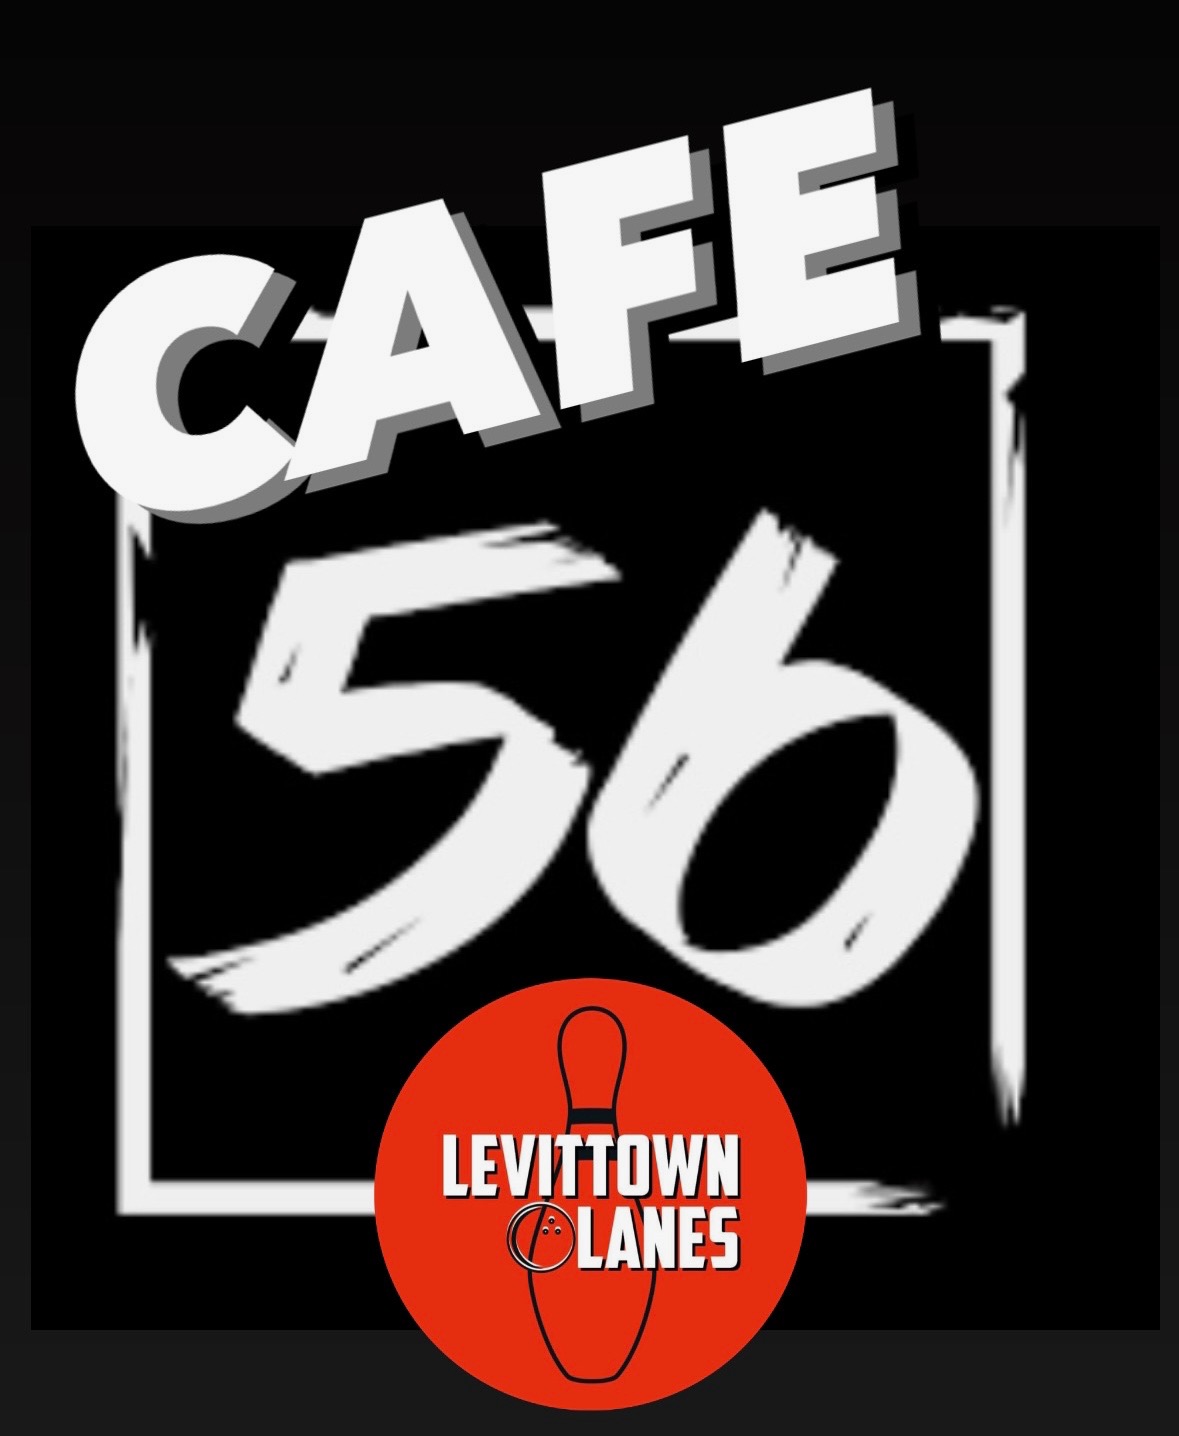 Great Eats at Cafe 56 located within Levittown Lanes